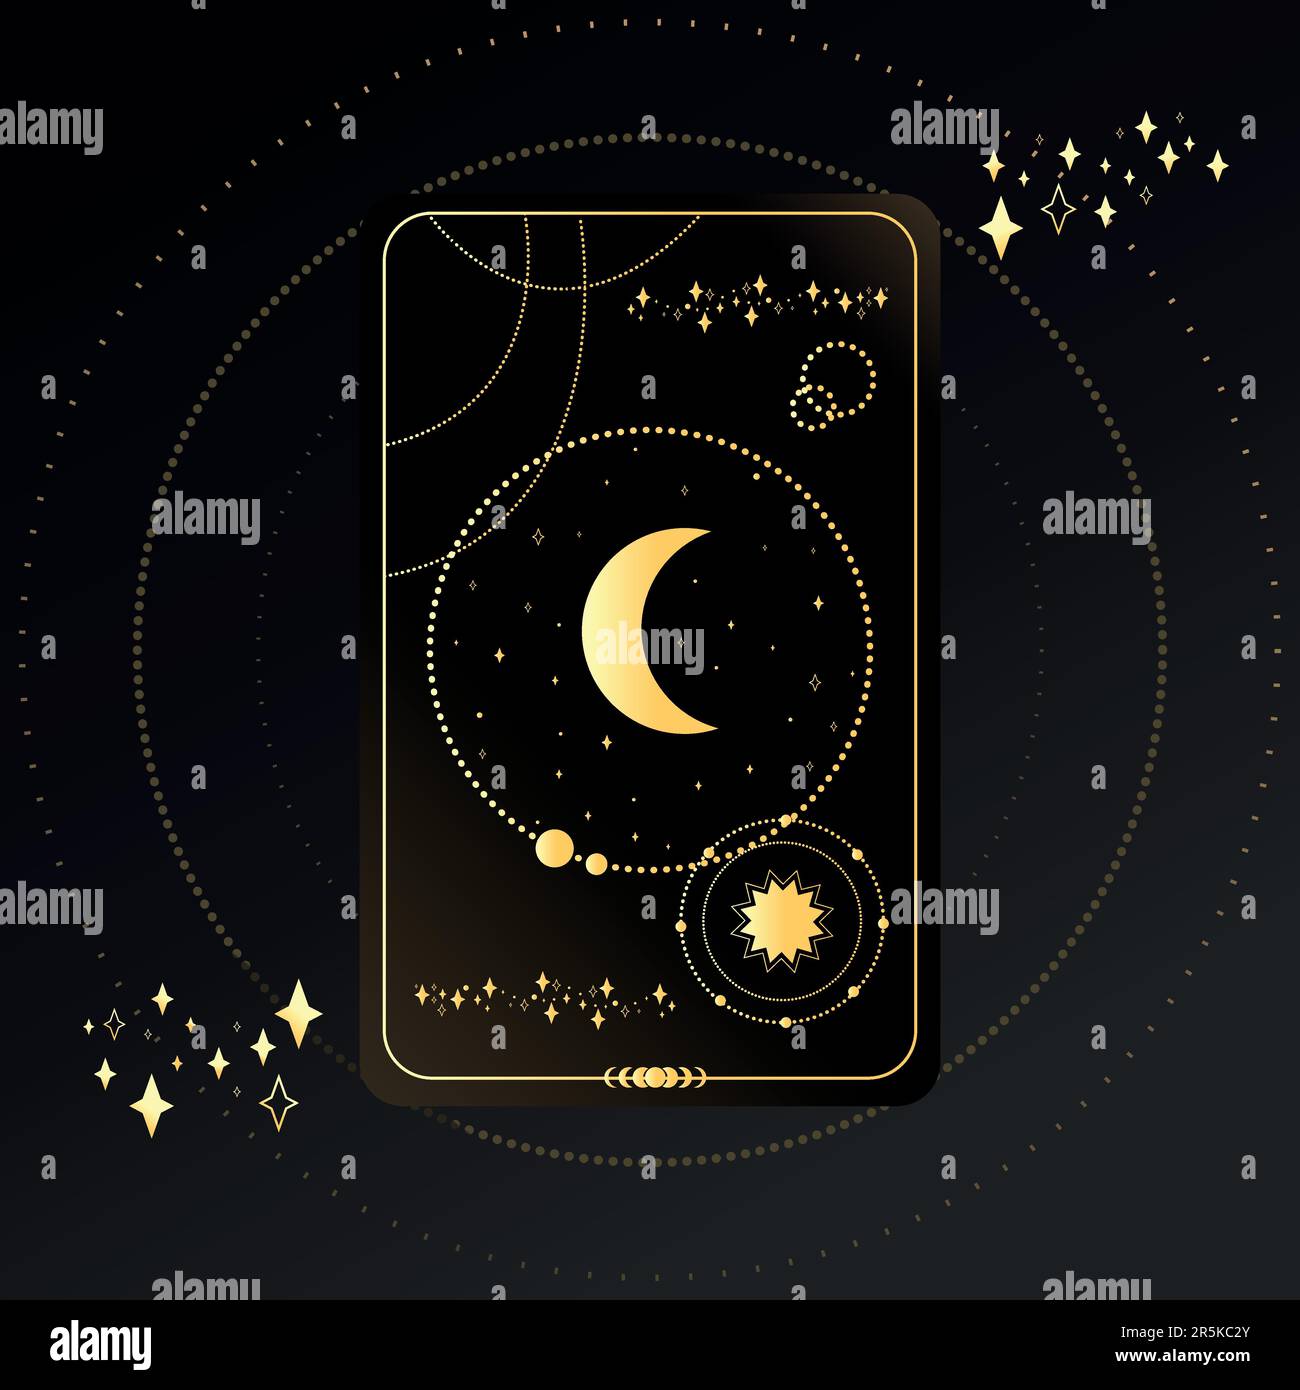 Gold Tarot card with a crescent on a black background with stars. Tarot symbolism. Mystery, astrology, esoteric Stock Vector